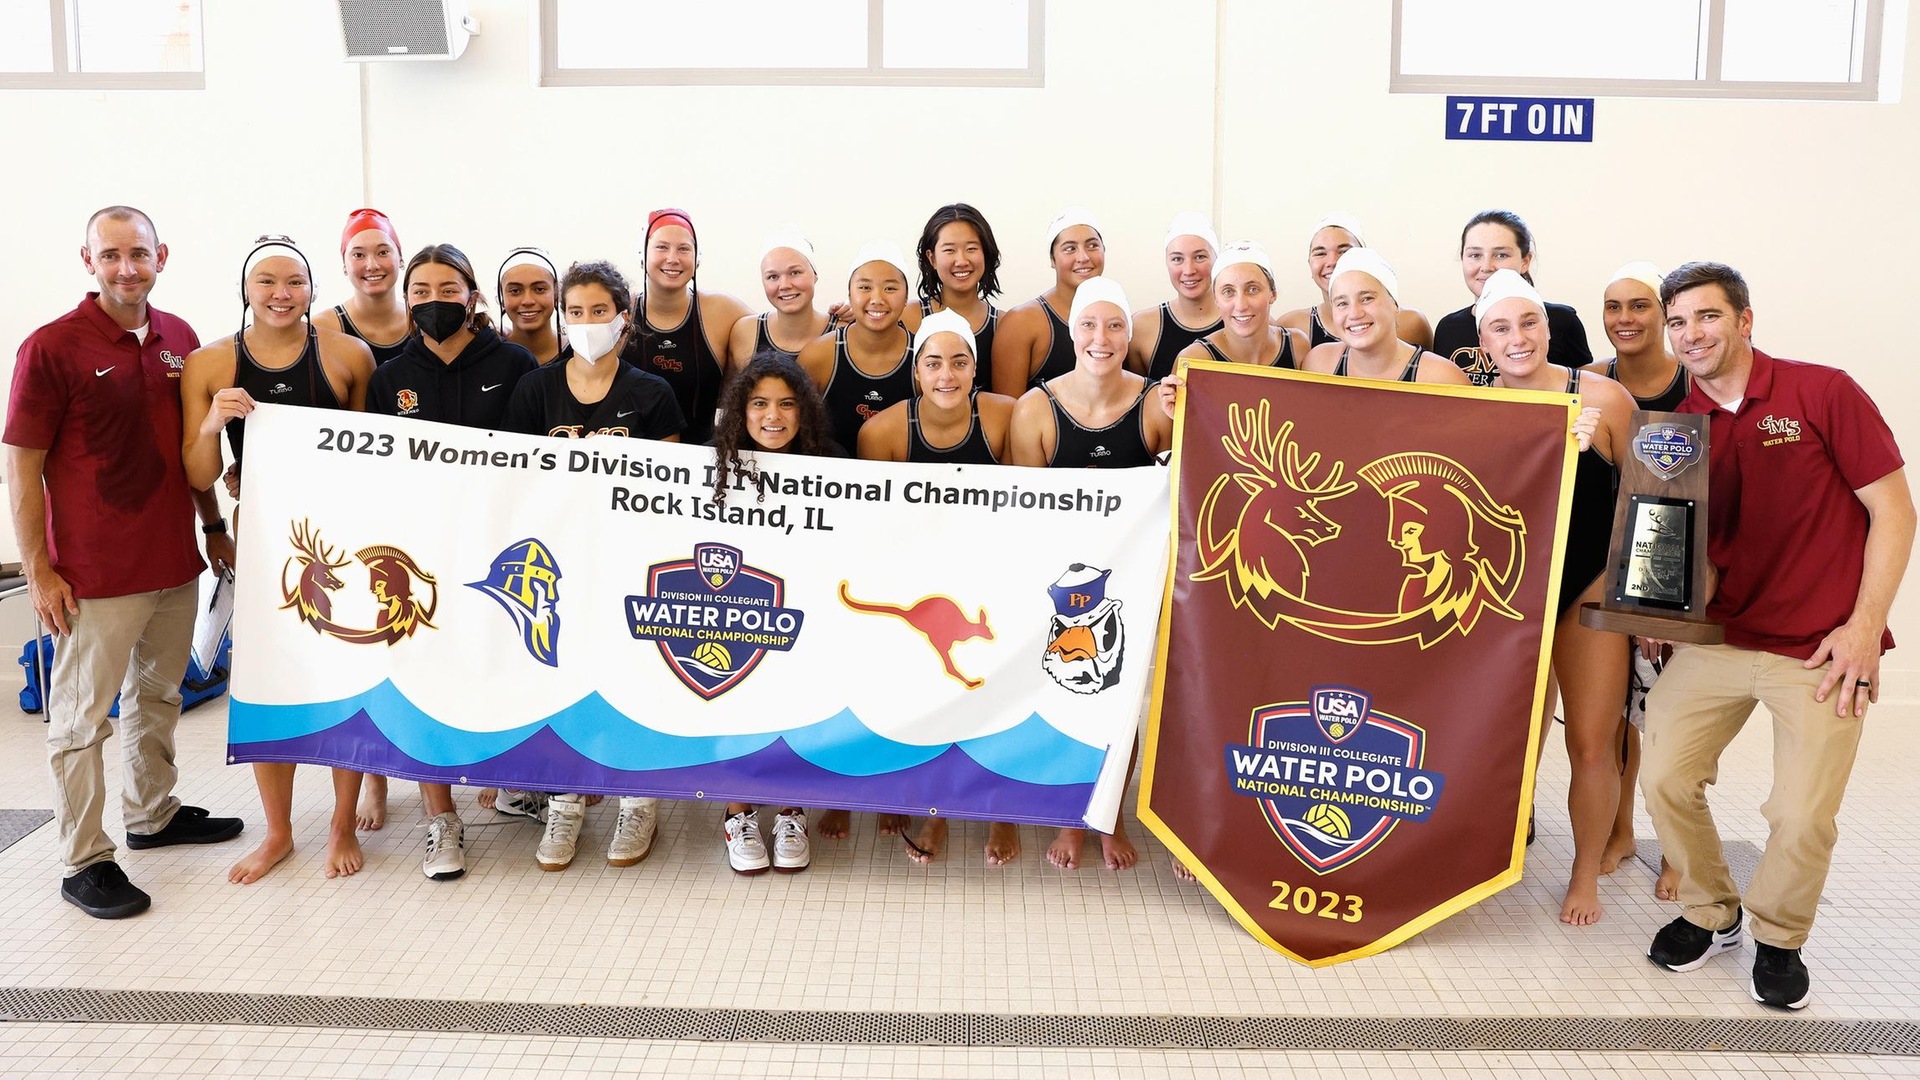 CMS went to OT in the finals in its first USA Water Polo DIII appearance